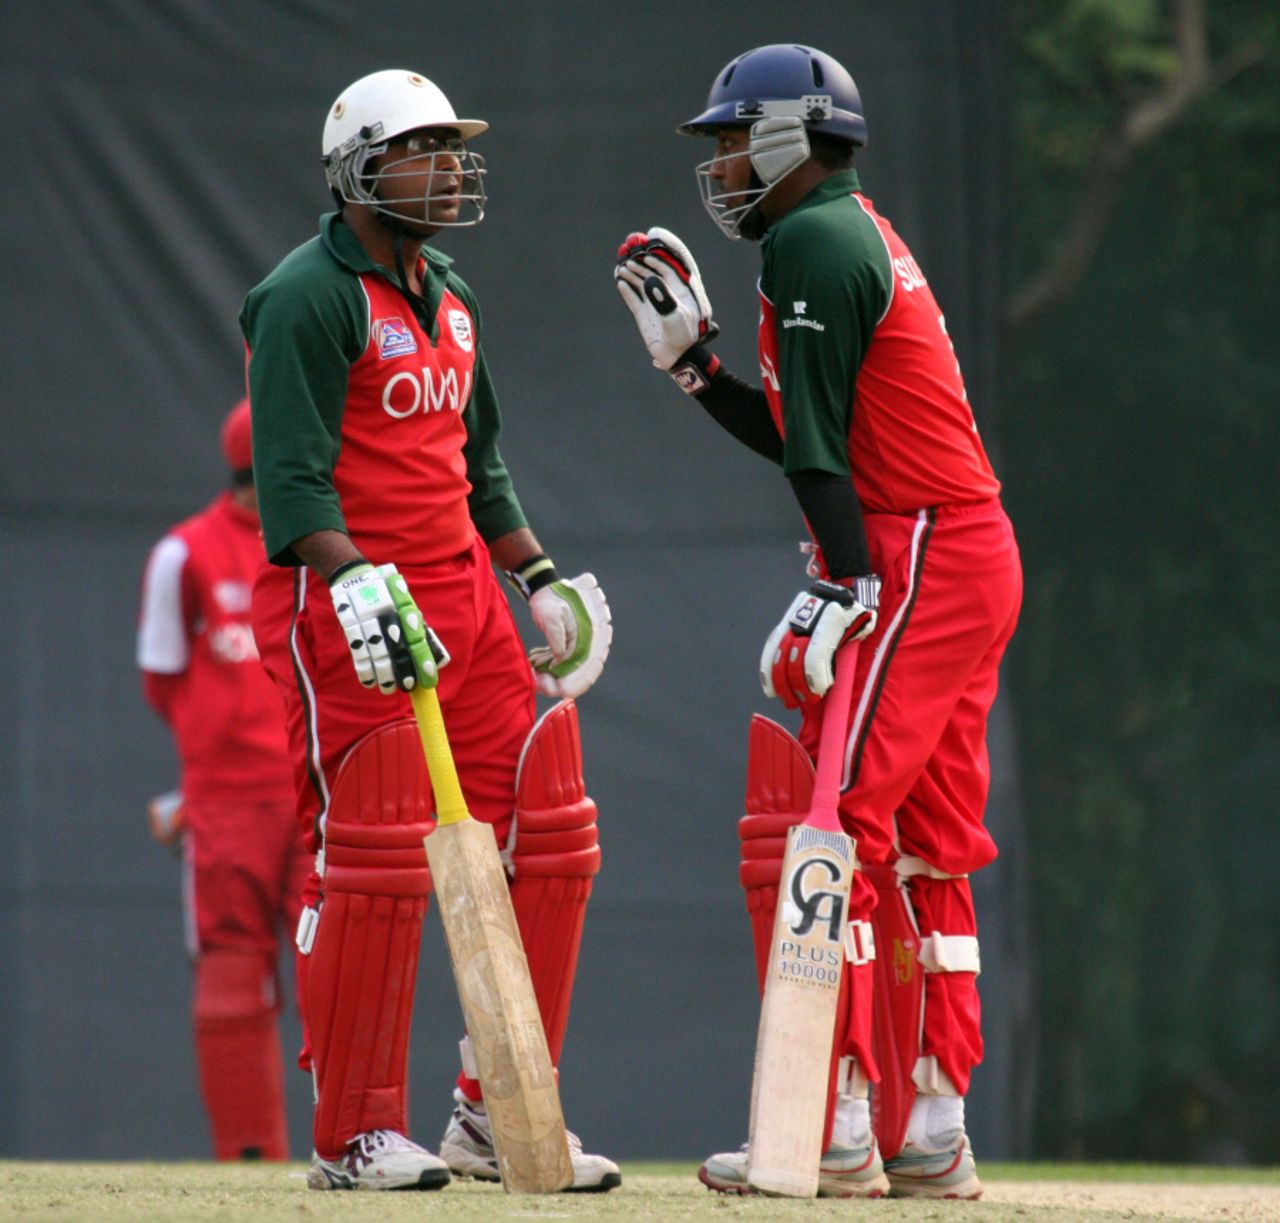 Sultan Ahmed and Amir Ali put on an unbeaten 71 for the 8th wicket, Italy v Papua New Guinea, WCL Division 3, Wong Nai, January 23, 2011